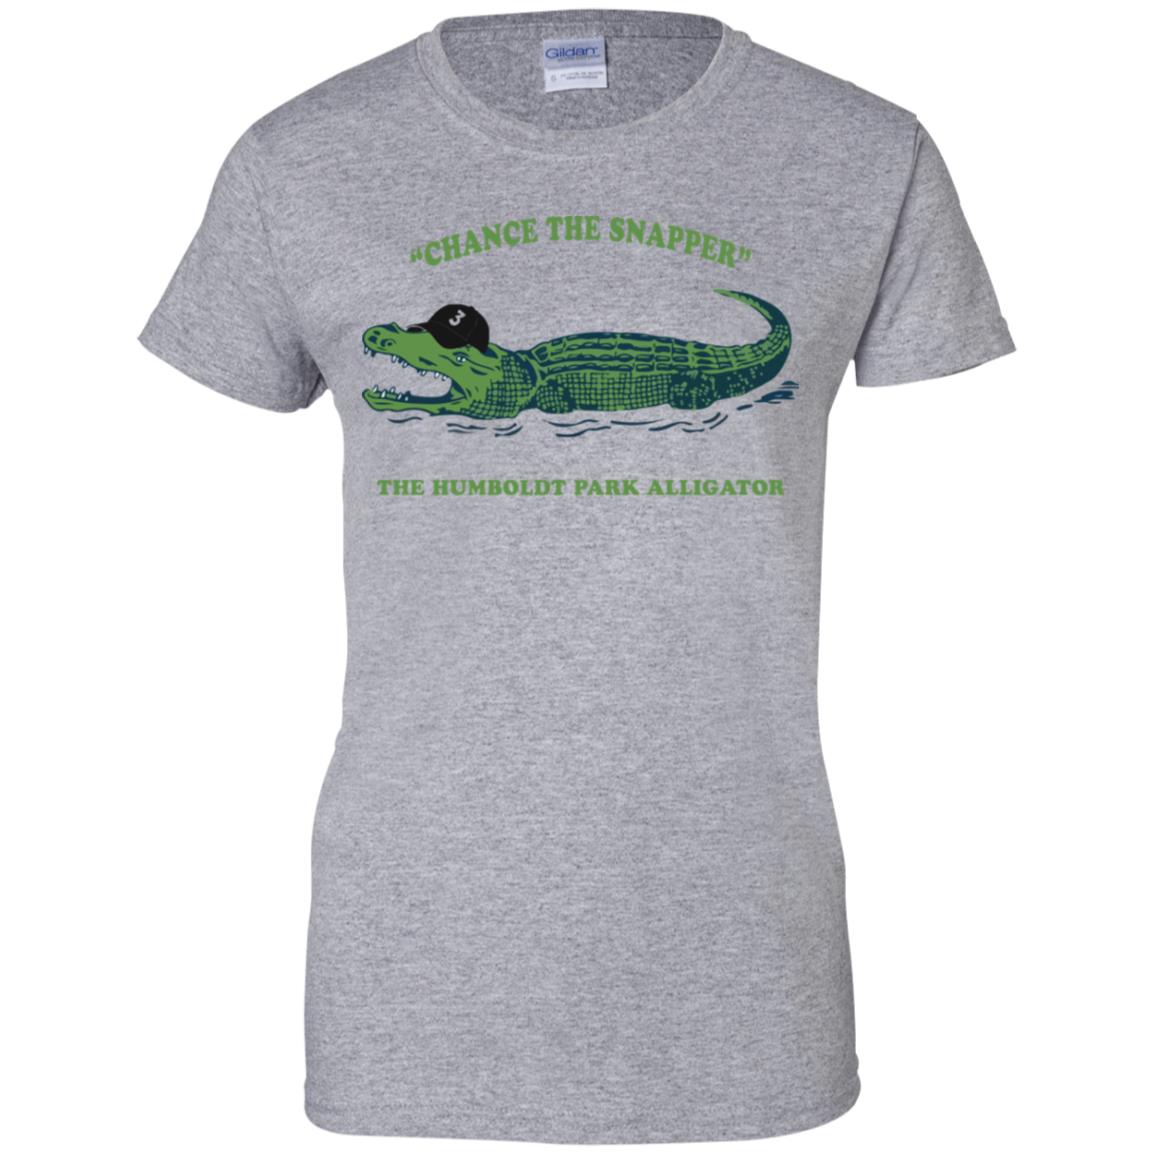 Chicago Gator Chance The snapper shirt 